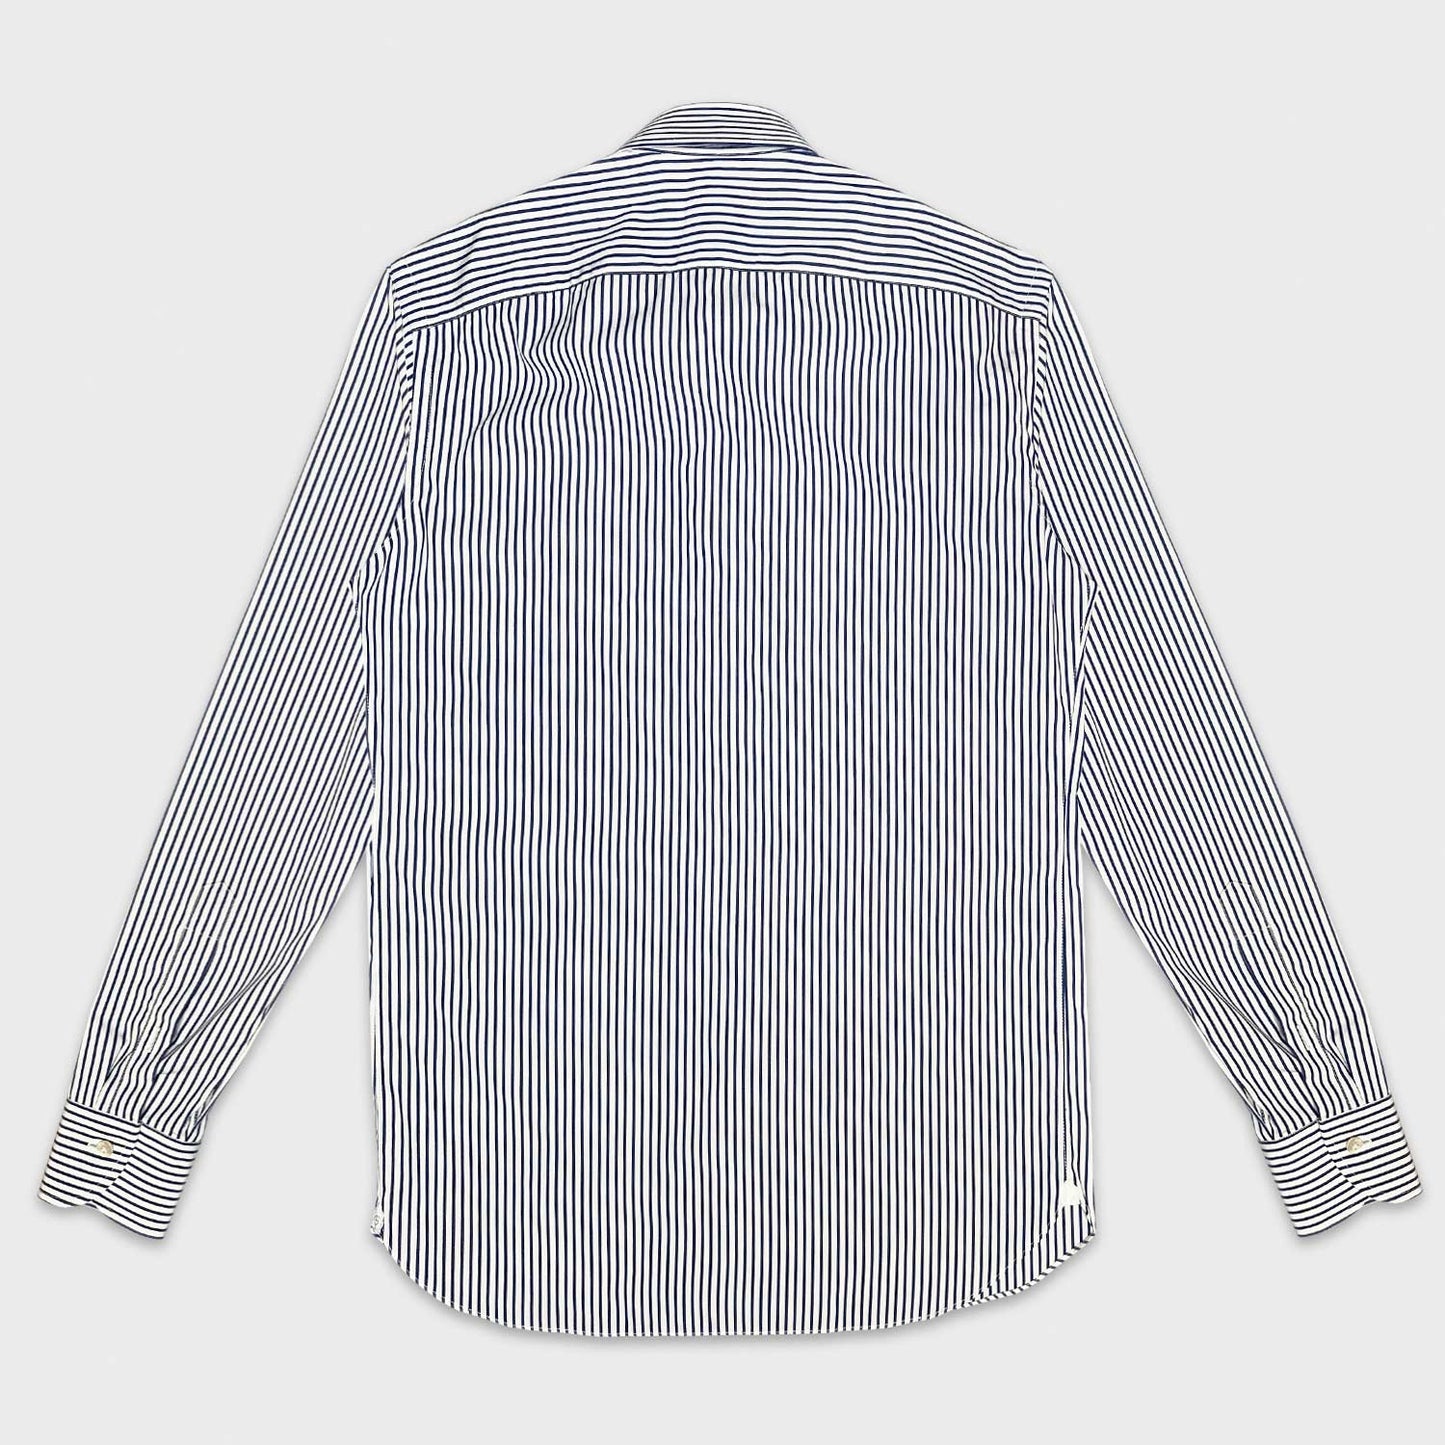 Classic blue striped shirt made with Thomas Mason fabric yarn-dyed in popeline cotton. Handmade shirt by Borriello Napoli exclusive for Wools Boutique Uomo, ideal both for the office and for more formal occasions with a bright appearance and a soft and smooth hand.